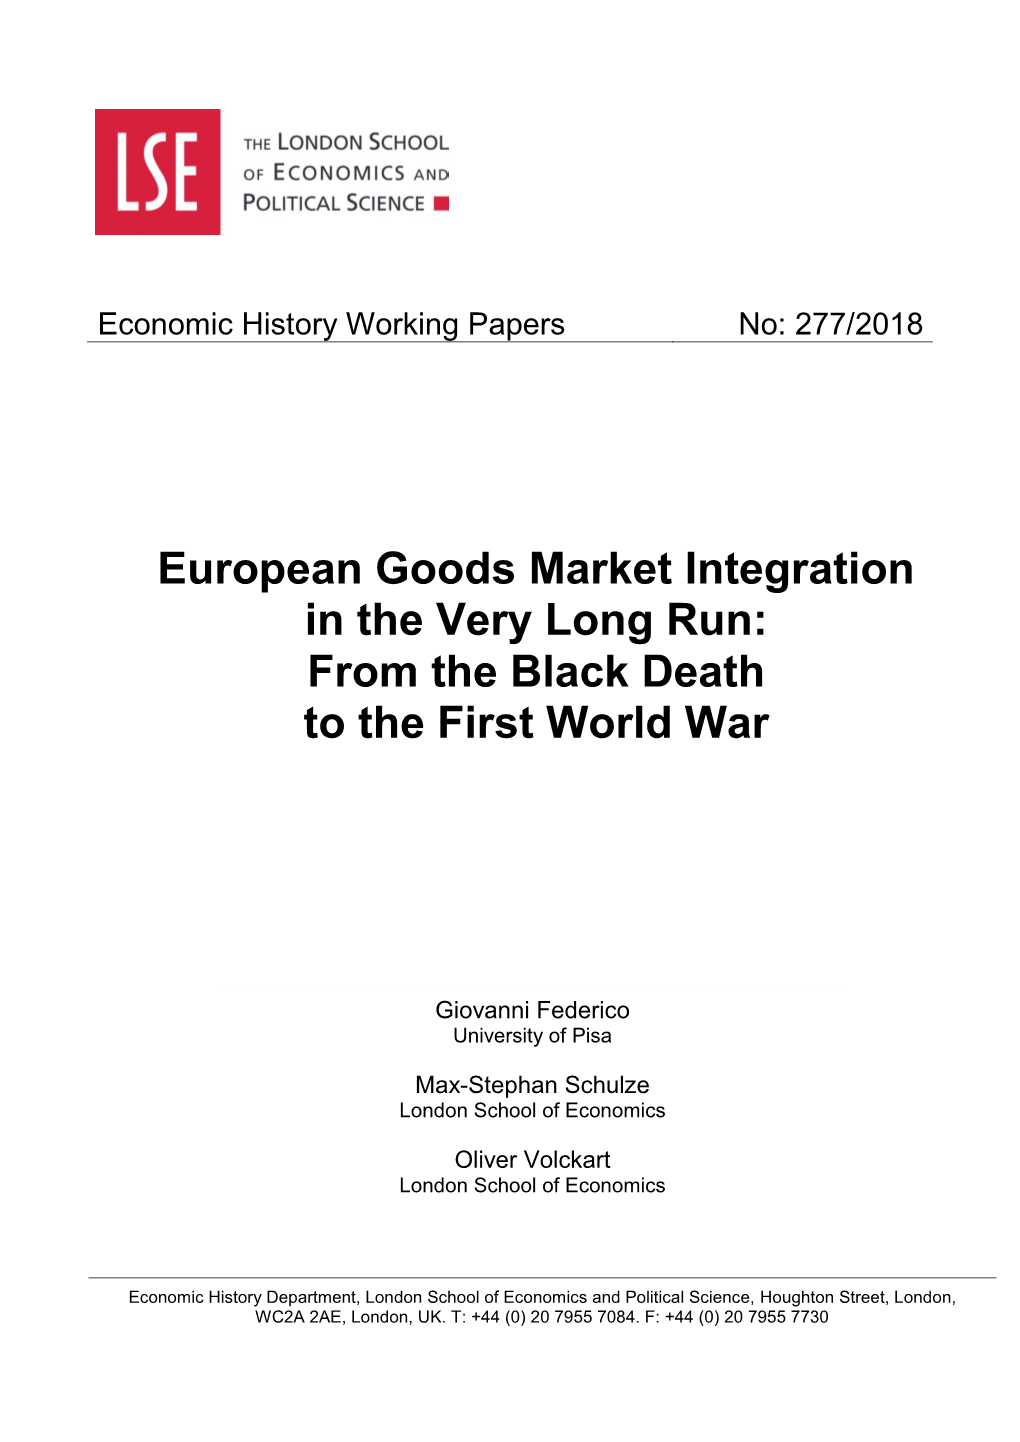 European Goods Market Integration in the Very Long Run: from the Black Death to the First World War1